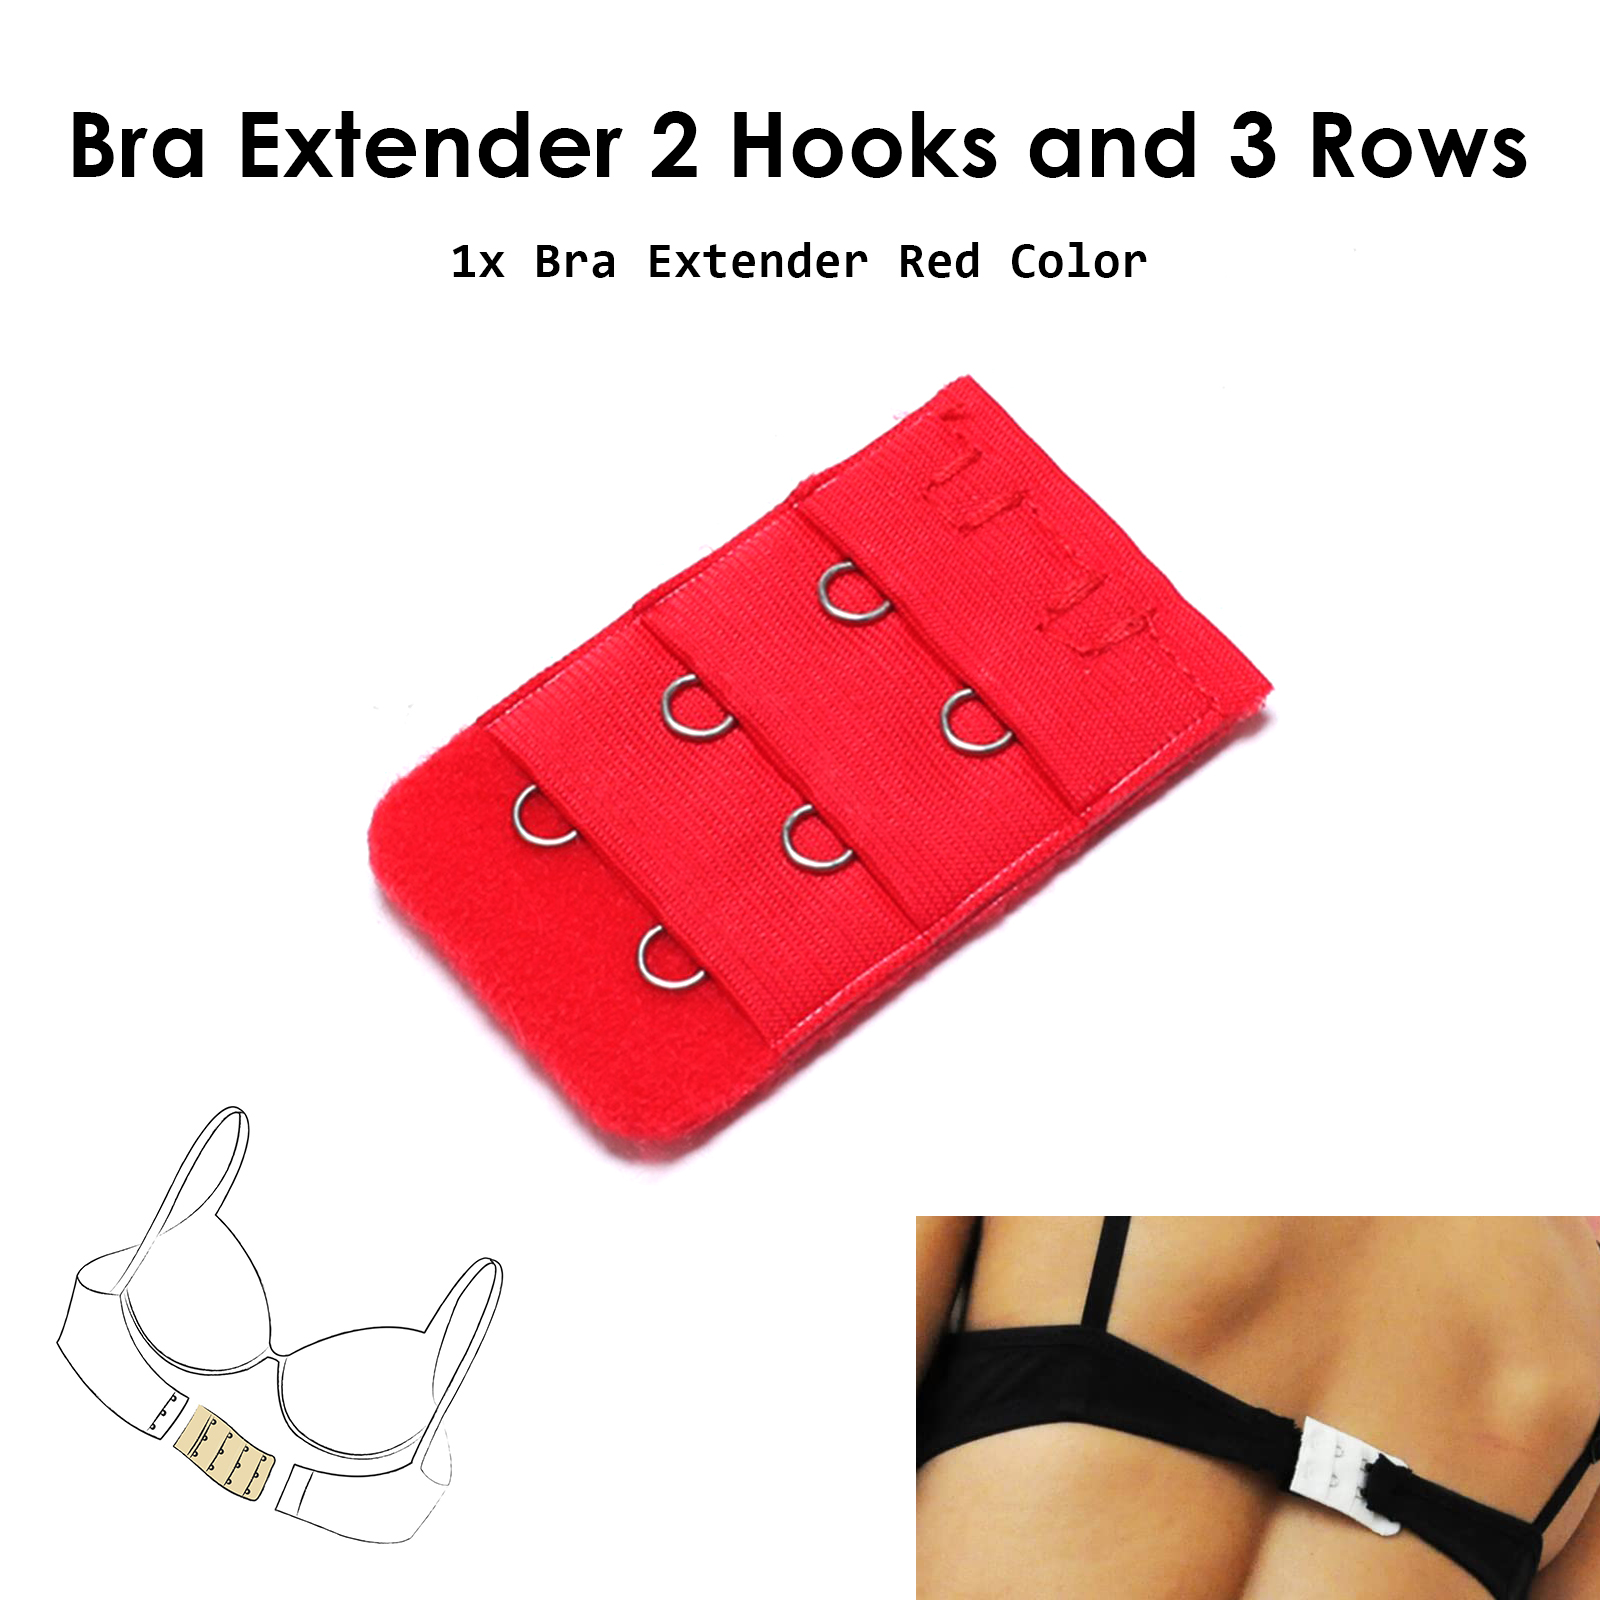 Best Quality Bra Extenders 2-Hooks 3-Rows Adjustable Belt Buckle for Ladies  Useful Accessory Bra Waist Band Extension Hook in Skin Pink White Red and